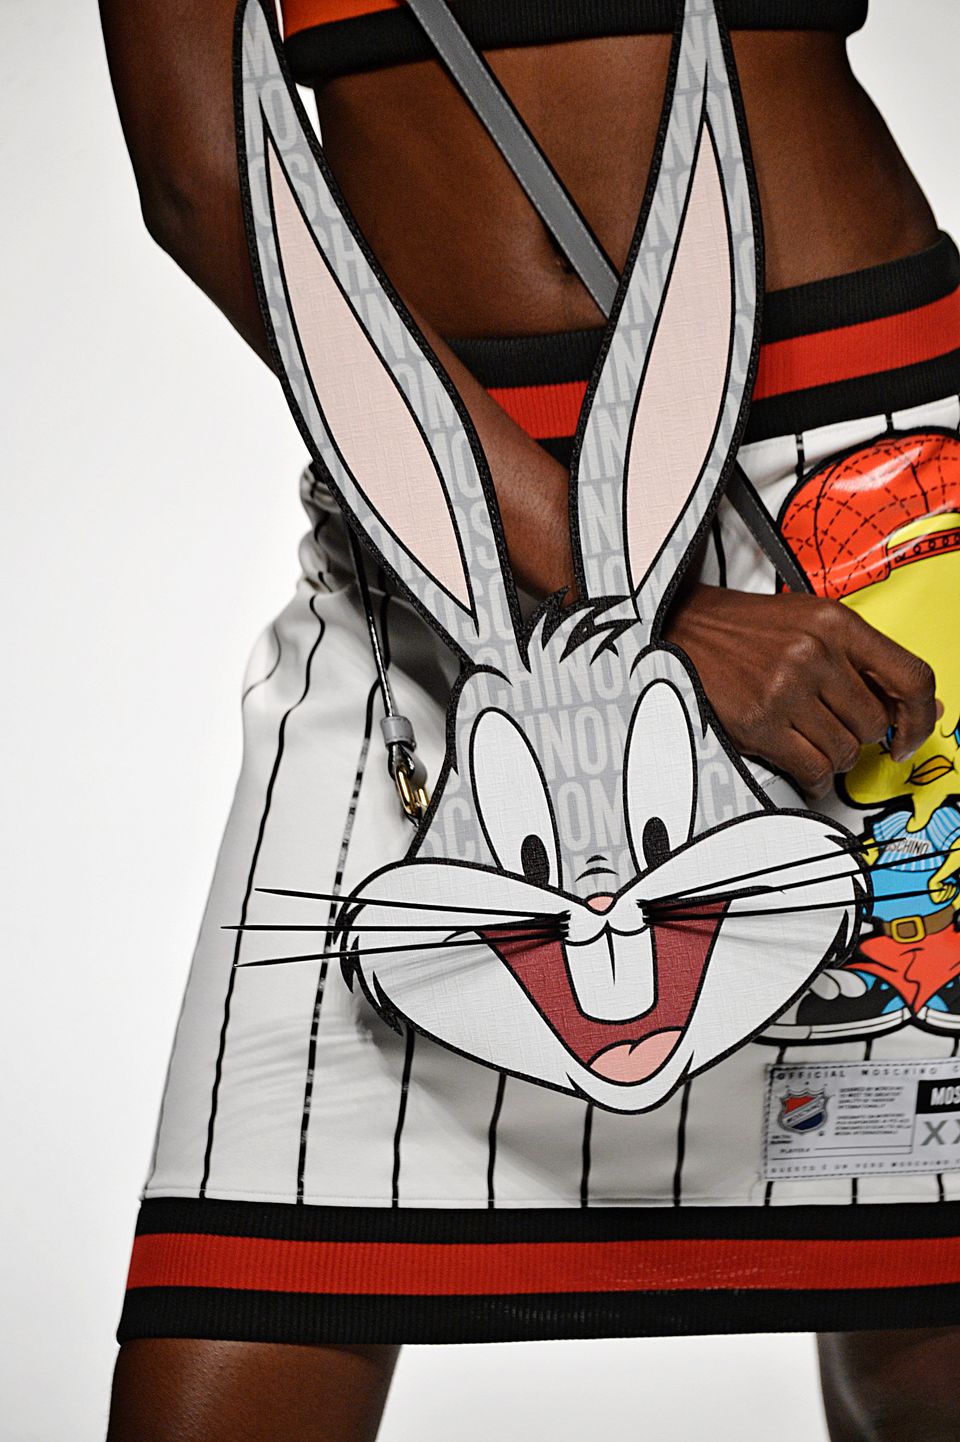 Moschino Bugs Bunny Basketball Jersey in Red